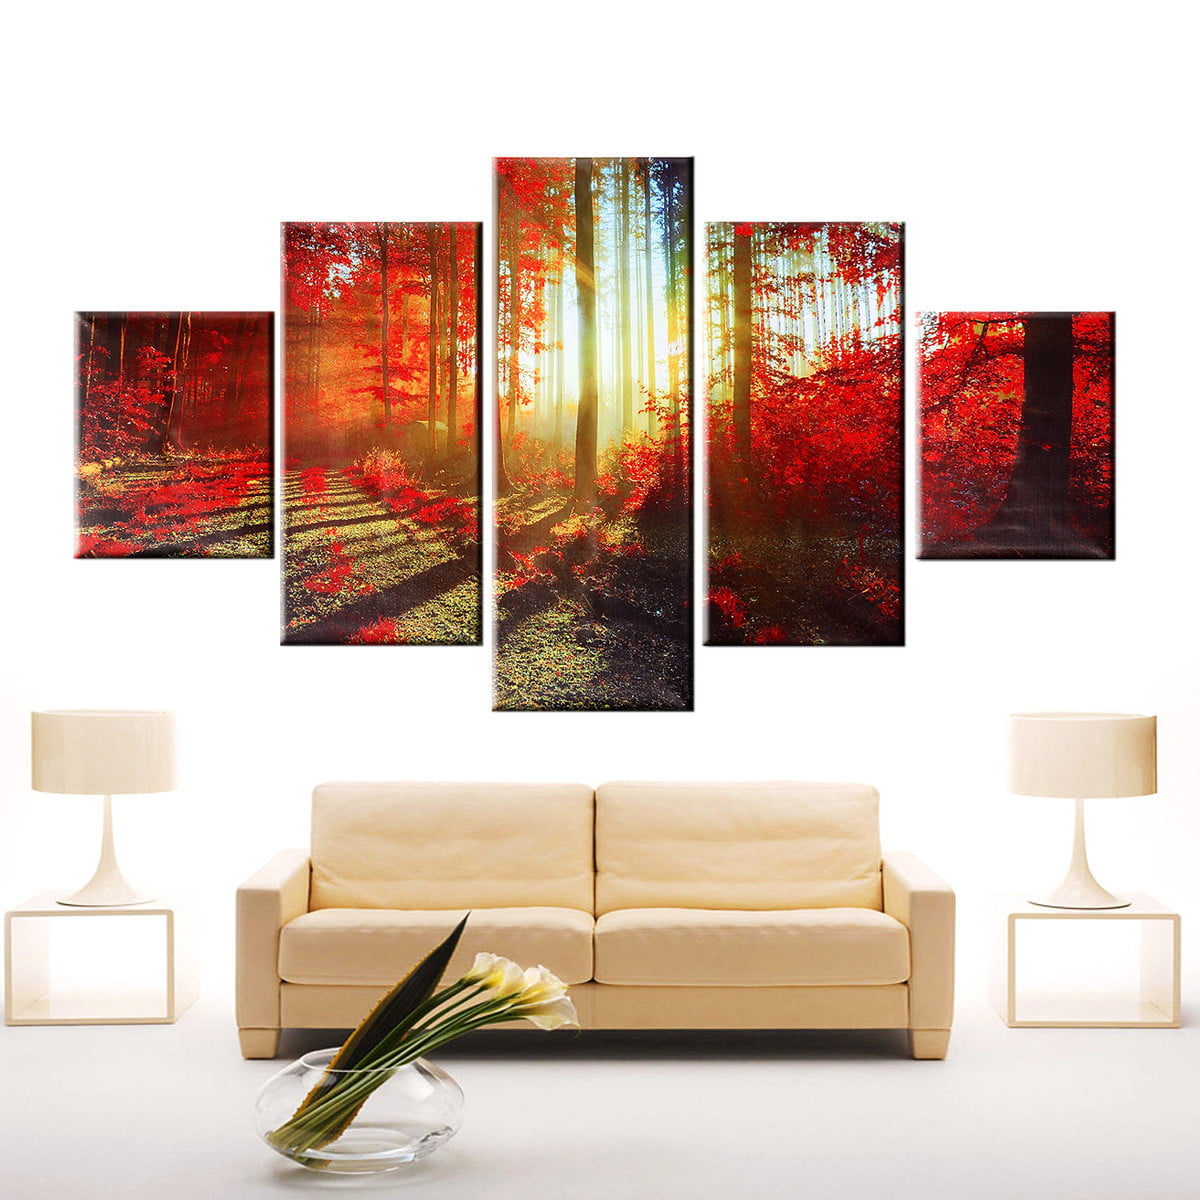 5pcs Unframed Art Oil Sunset Painting Print Canvas Picture Home Wall Room Deco